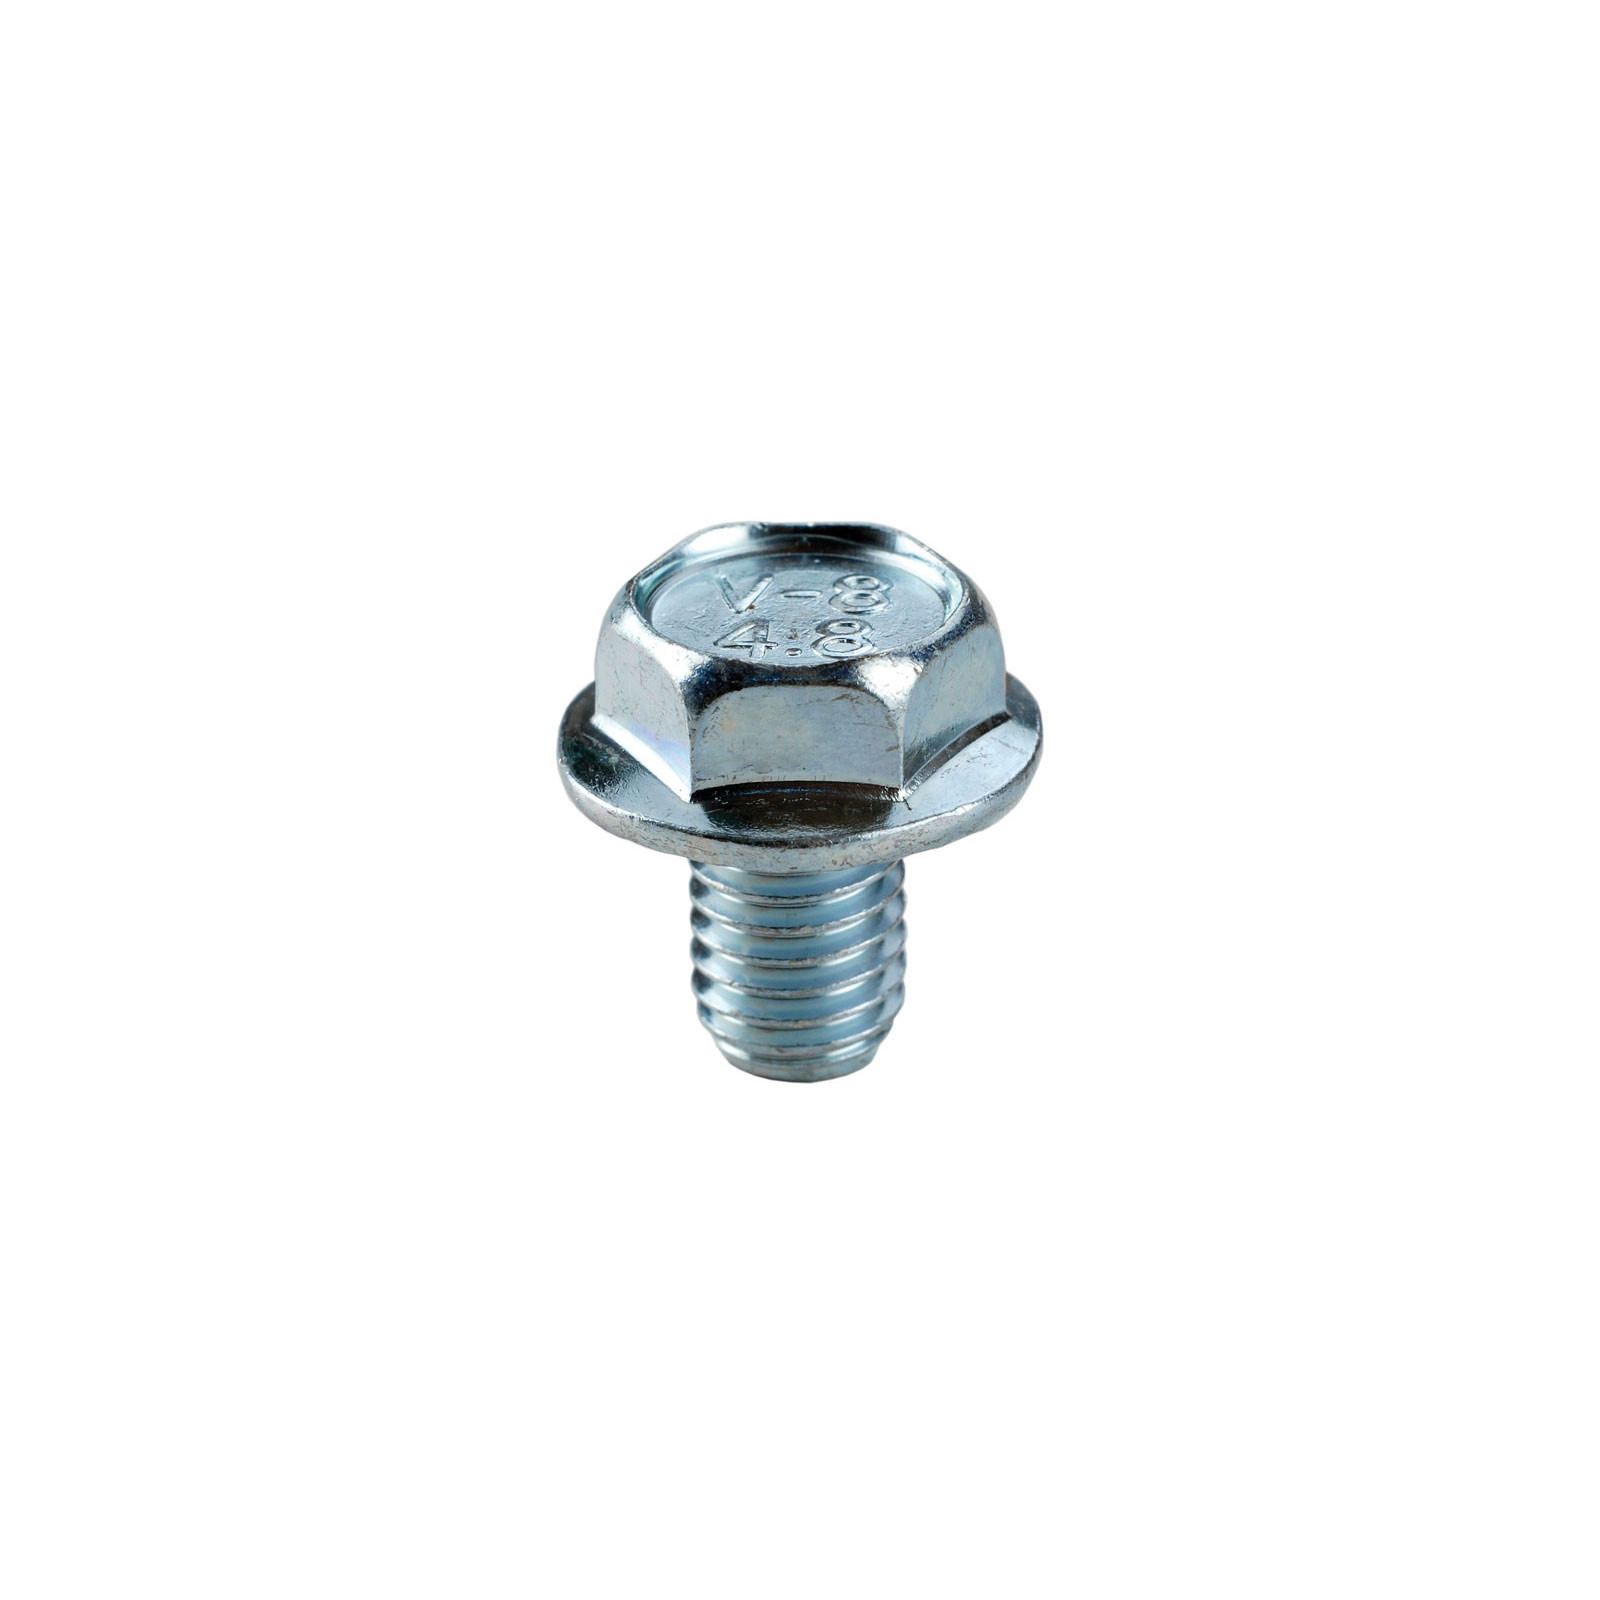 Bicycle Screw 8 x 12 mm for training wheels frame mounting